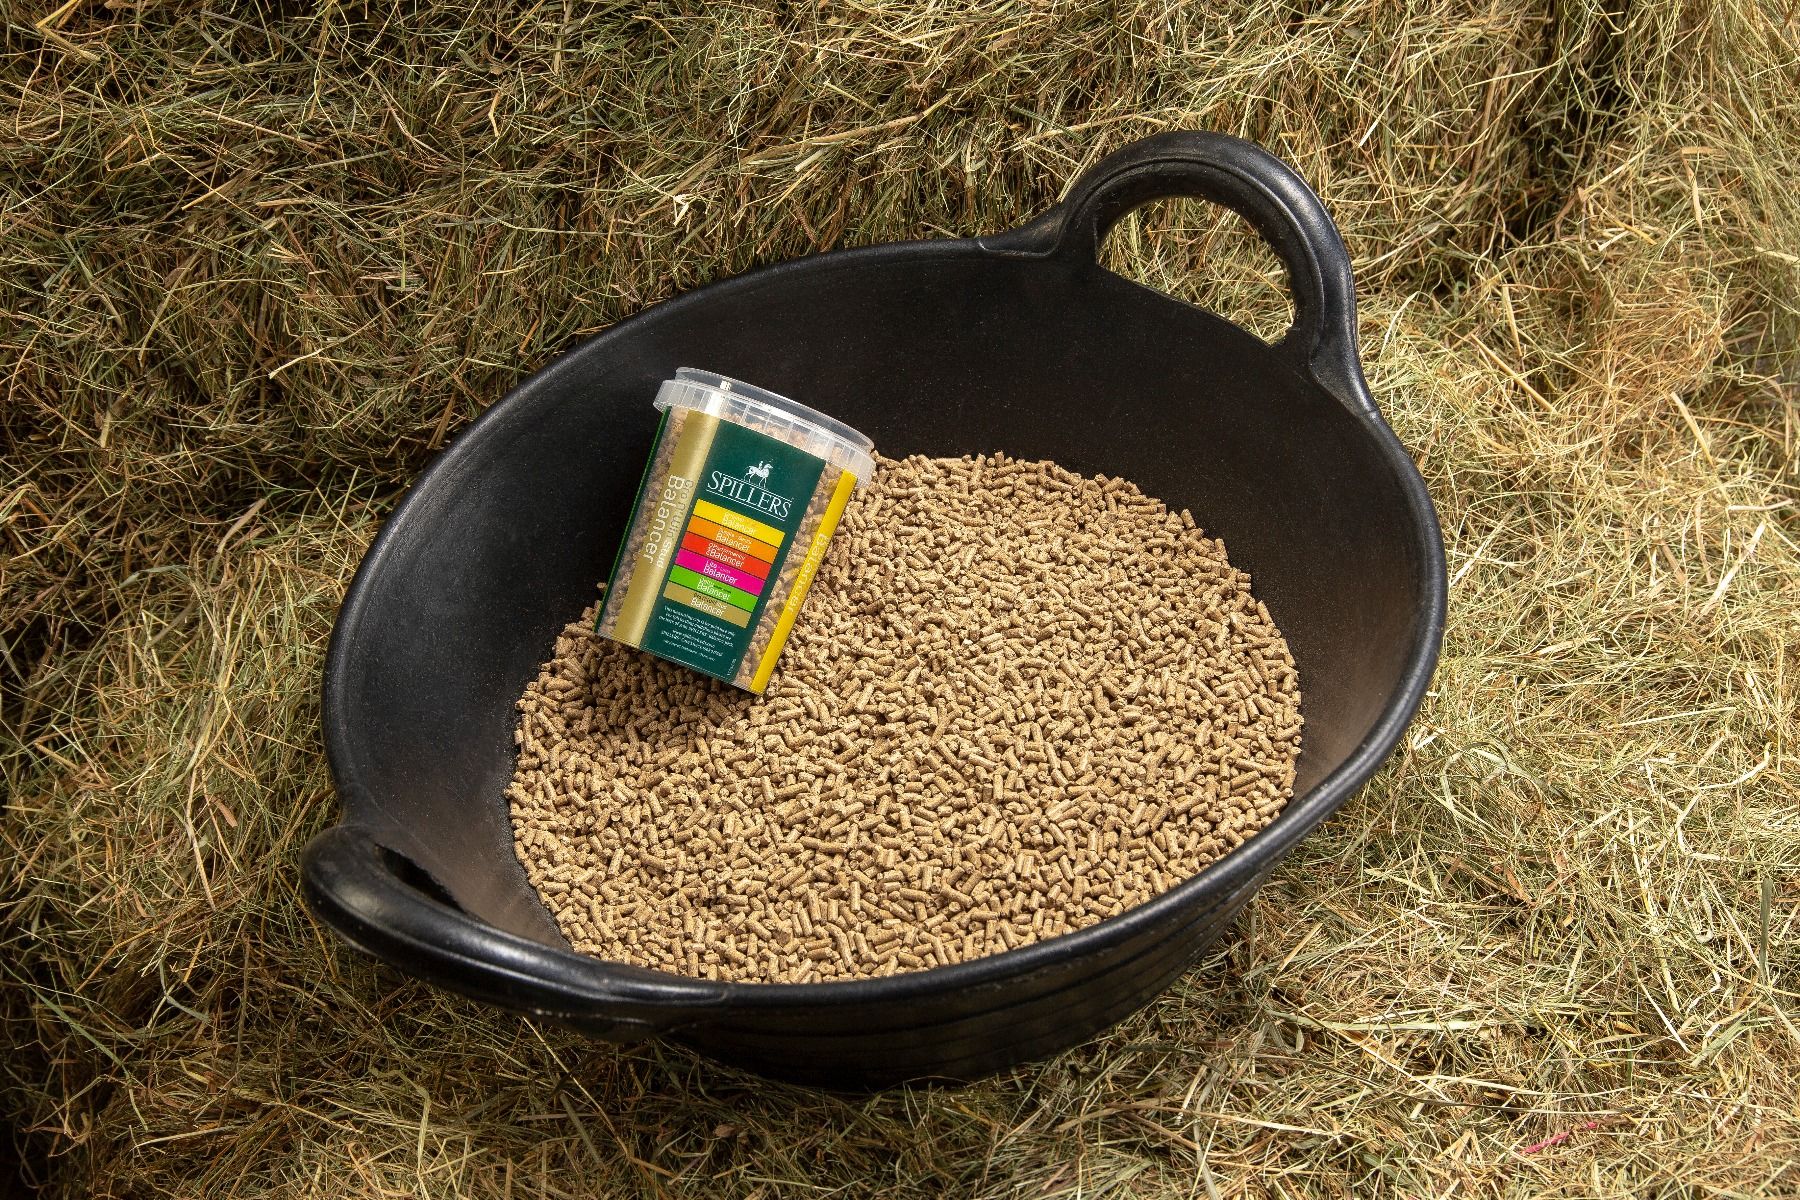 Spillers Horse Feed